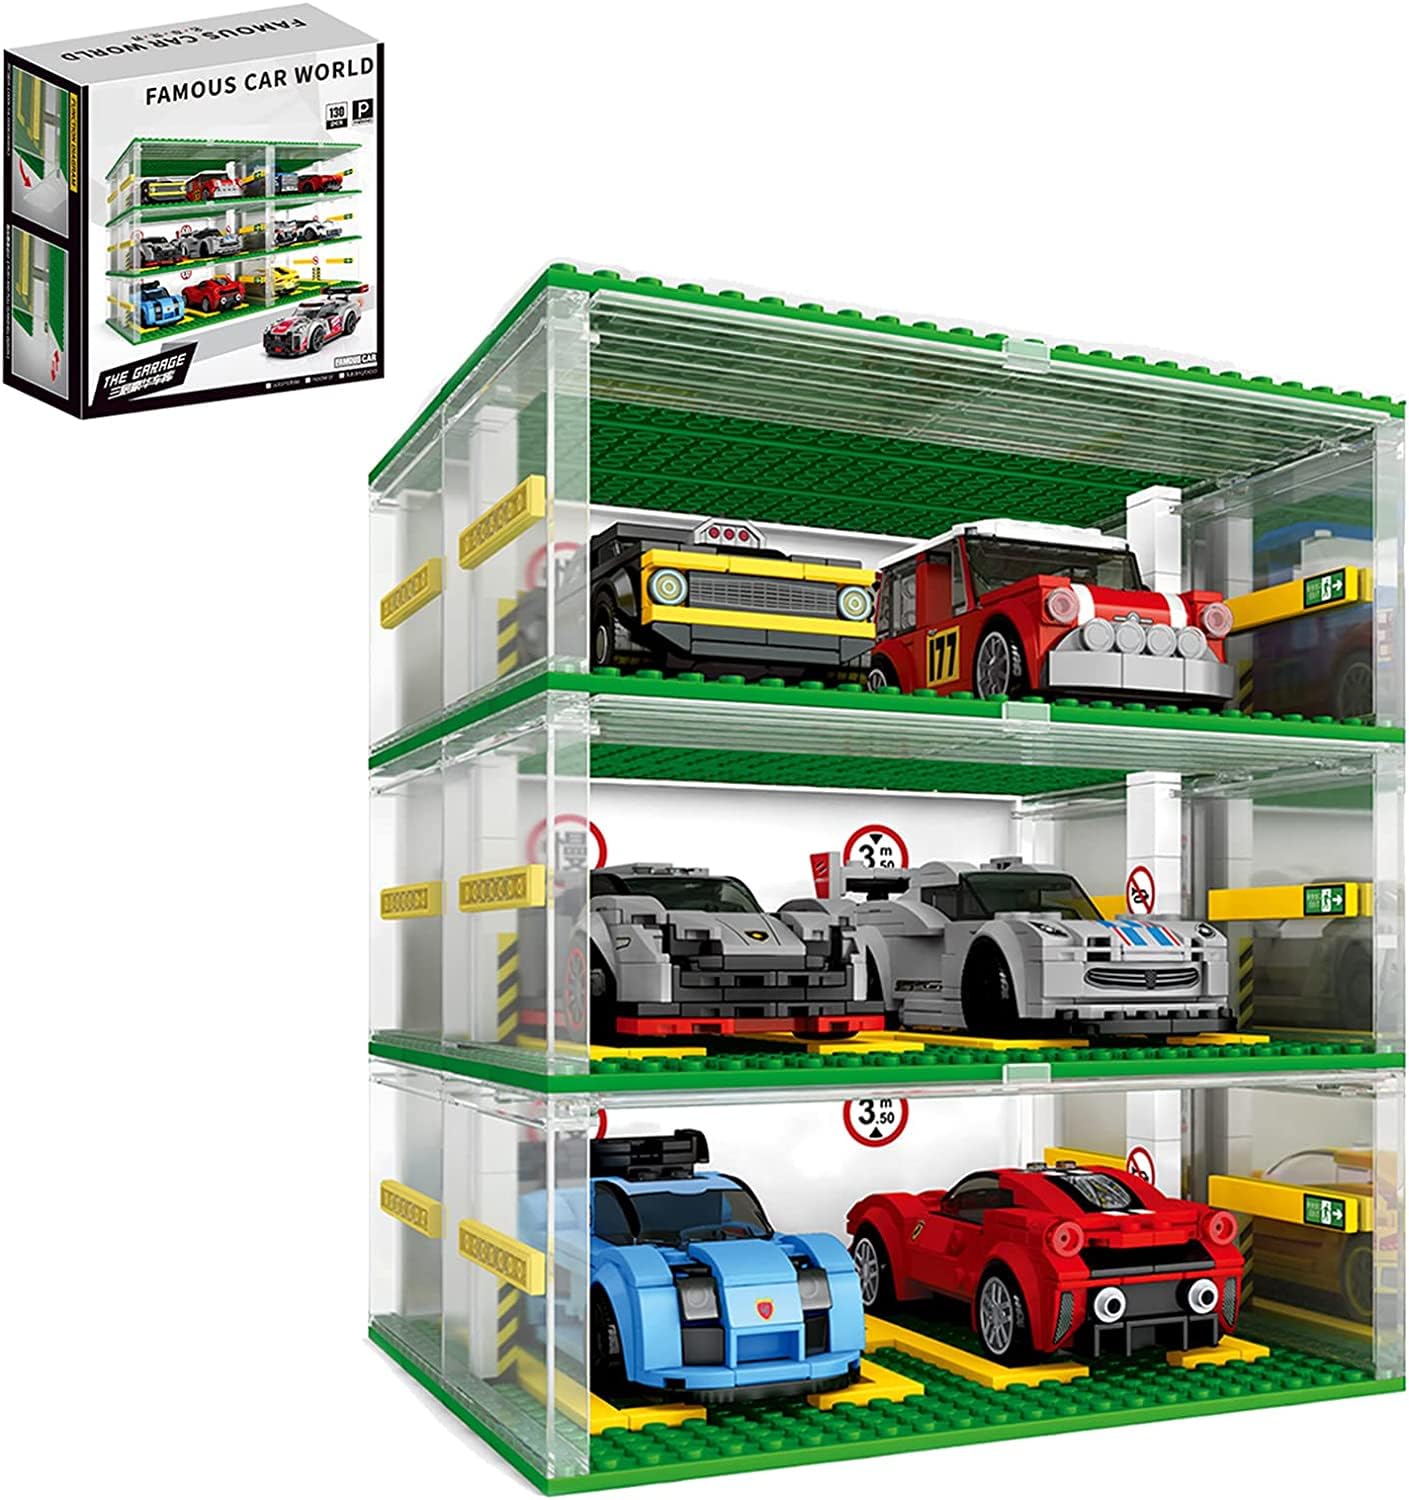 Parking Garage for Lego Speed Champions Race Car, DIY 3-Layer Parking Display Case Building Blocks Set (Not Include Race Car Model)